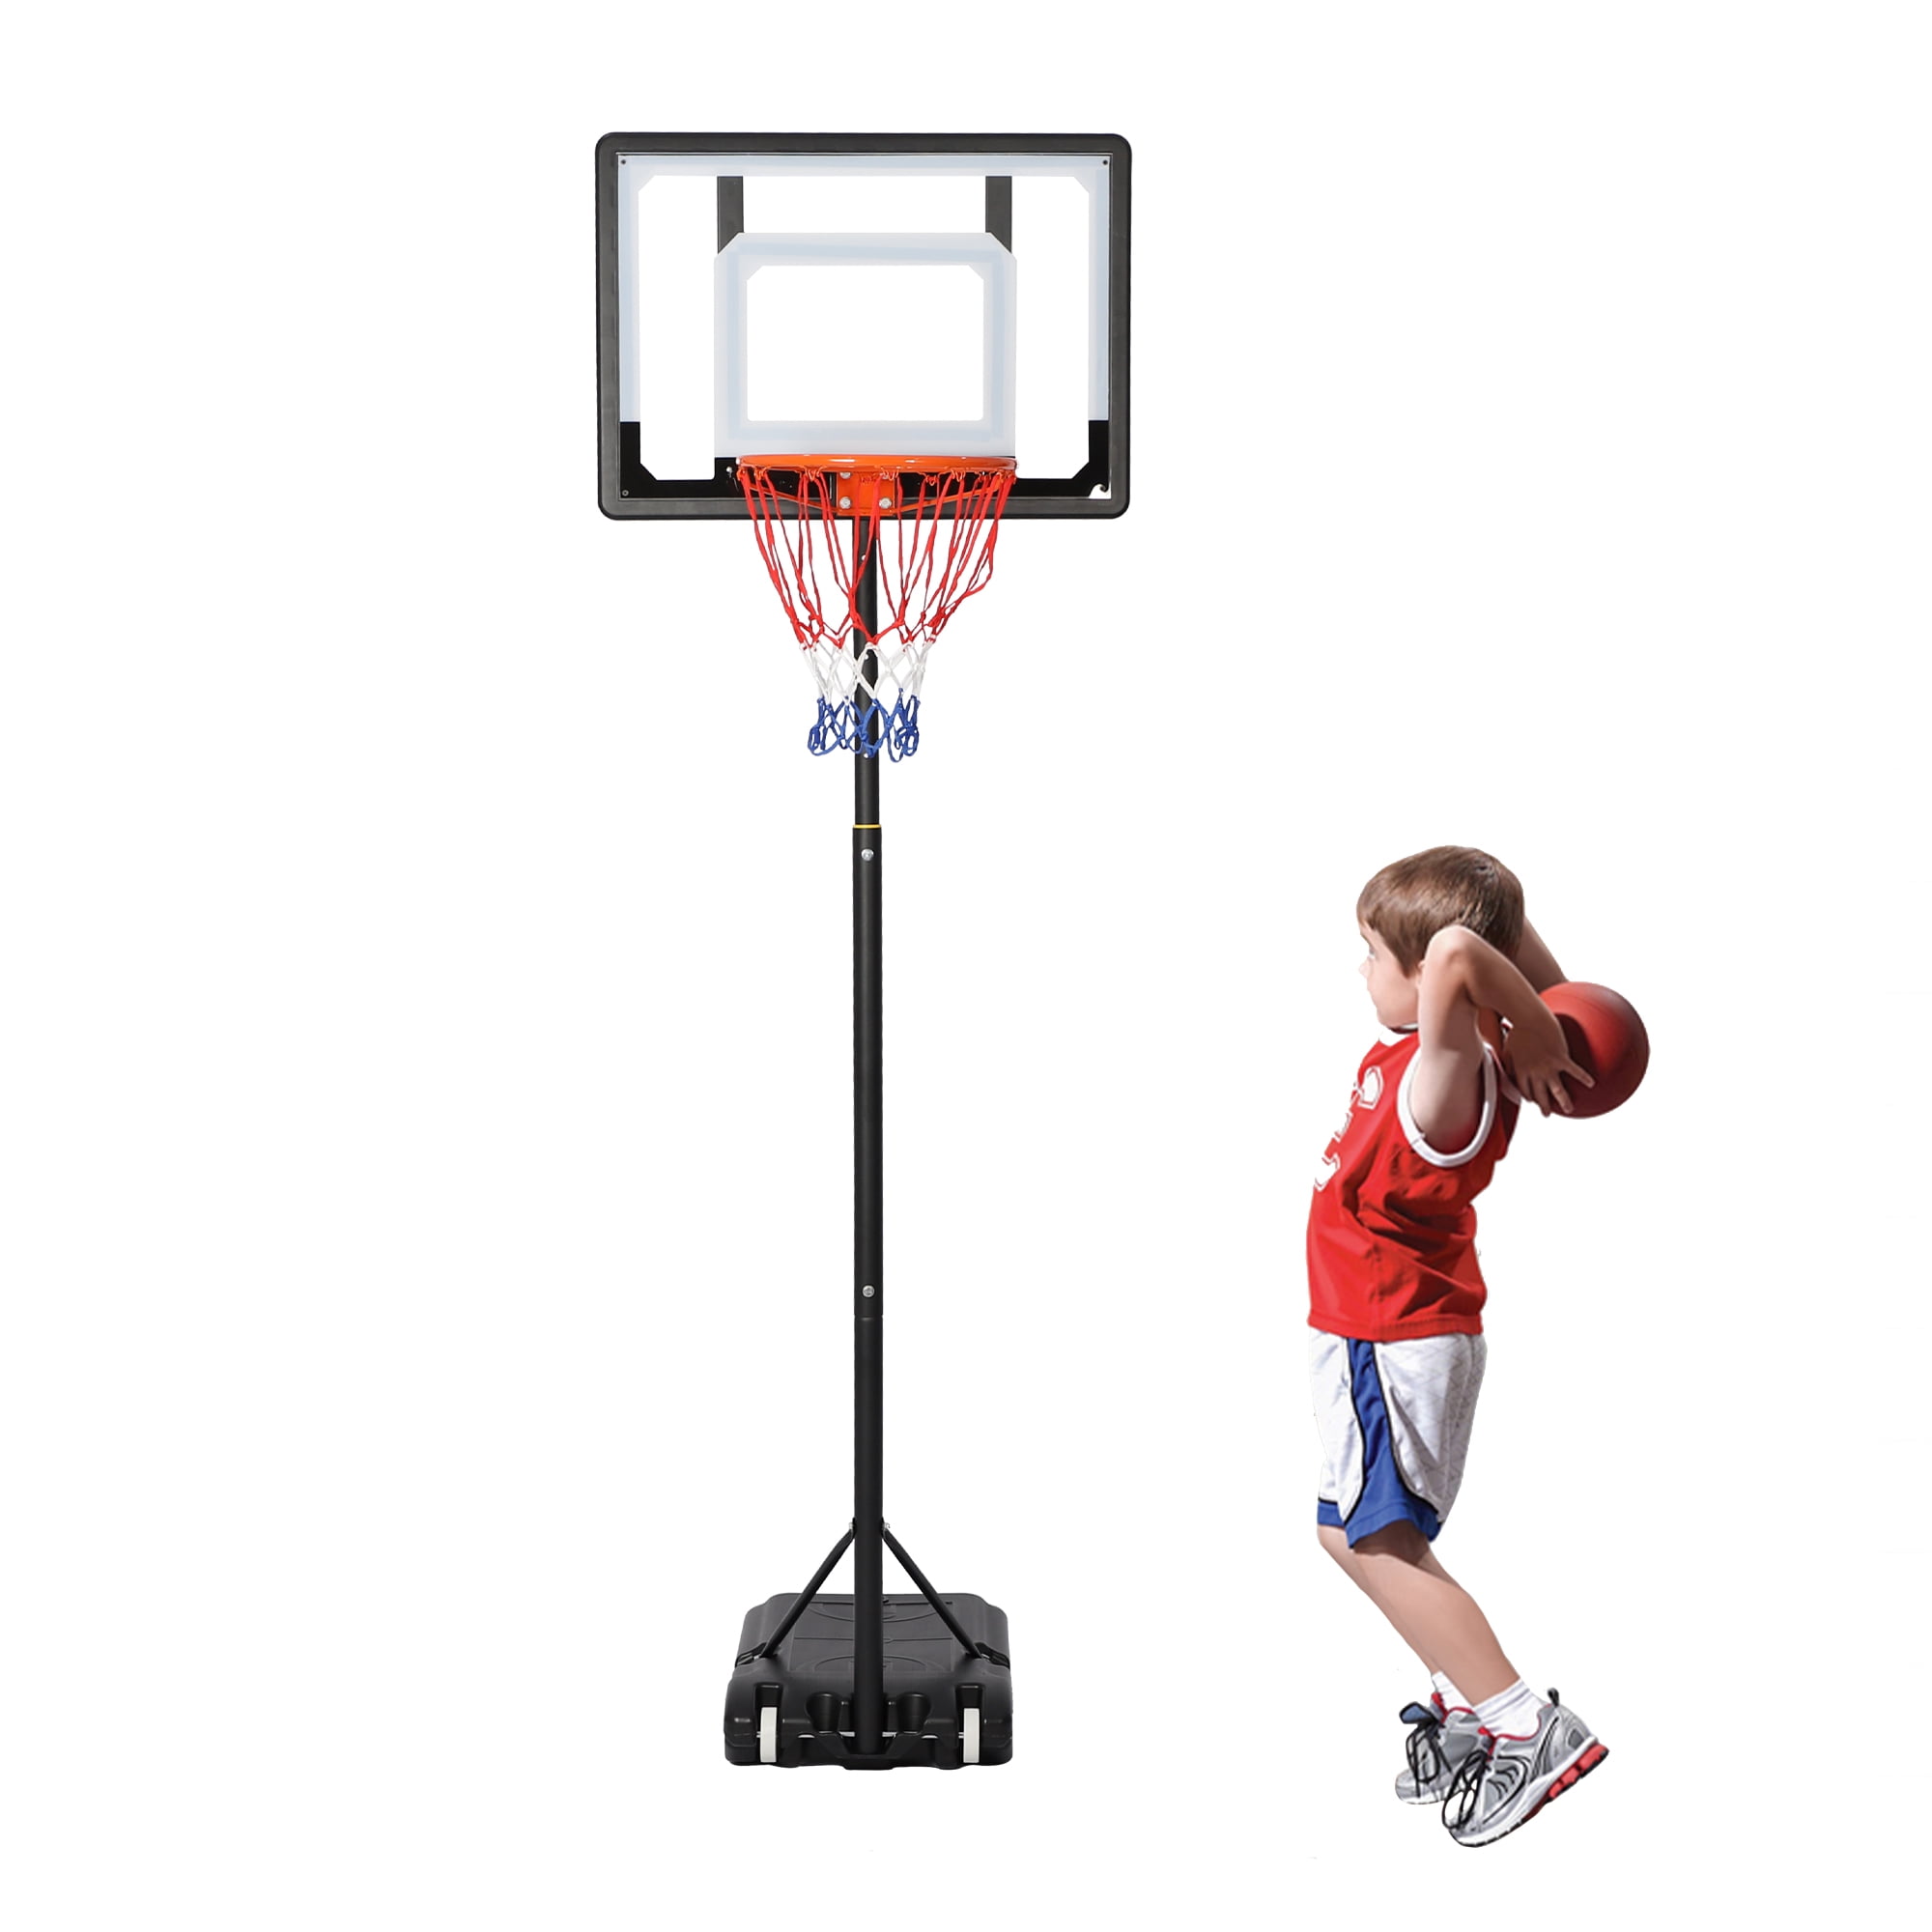 Details about   Kids Adjustable Portable Basketball Hoop 85 IN Impact In/Outdoor Rim Goal Stand 